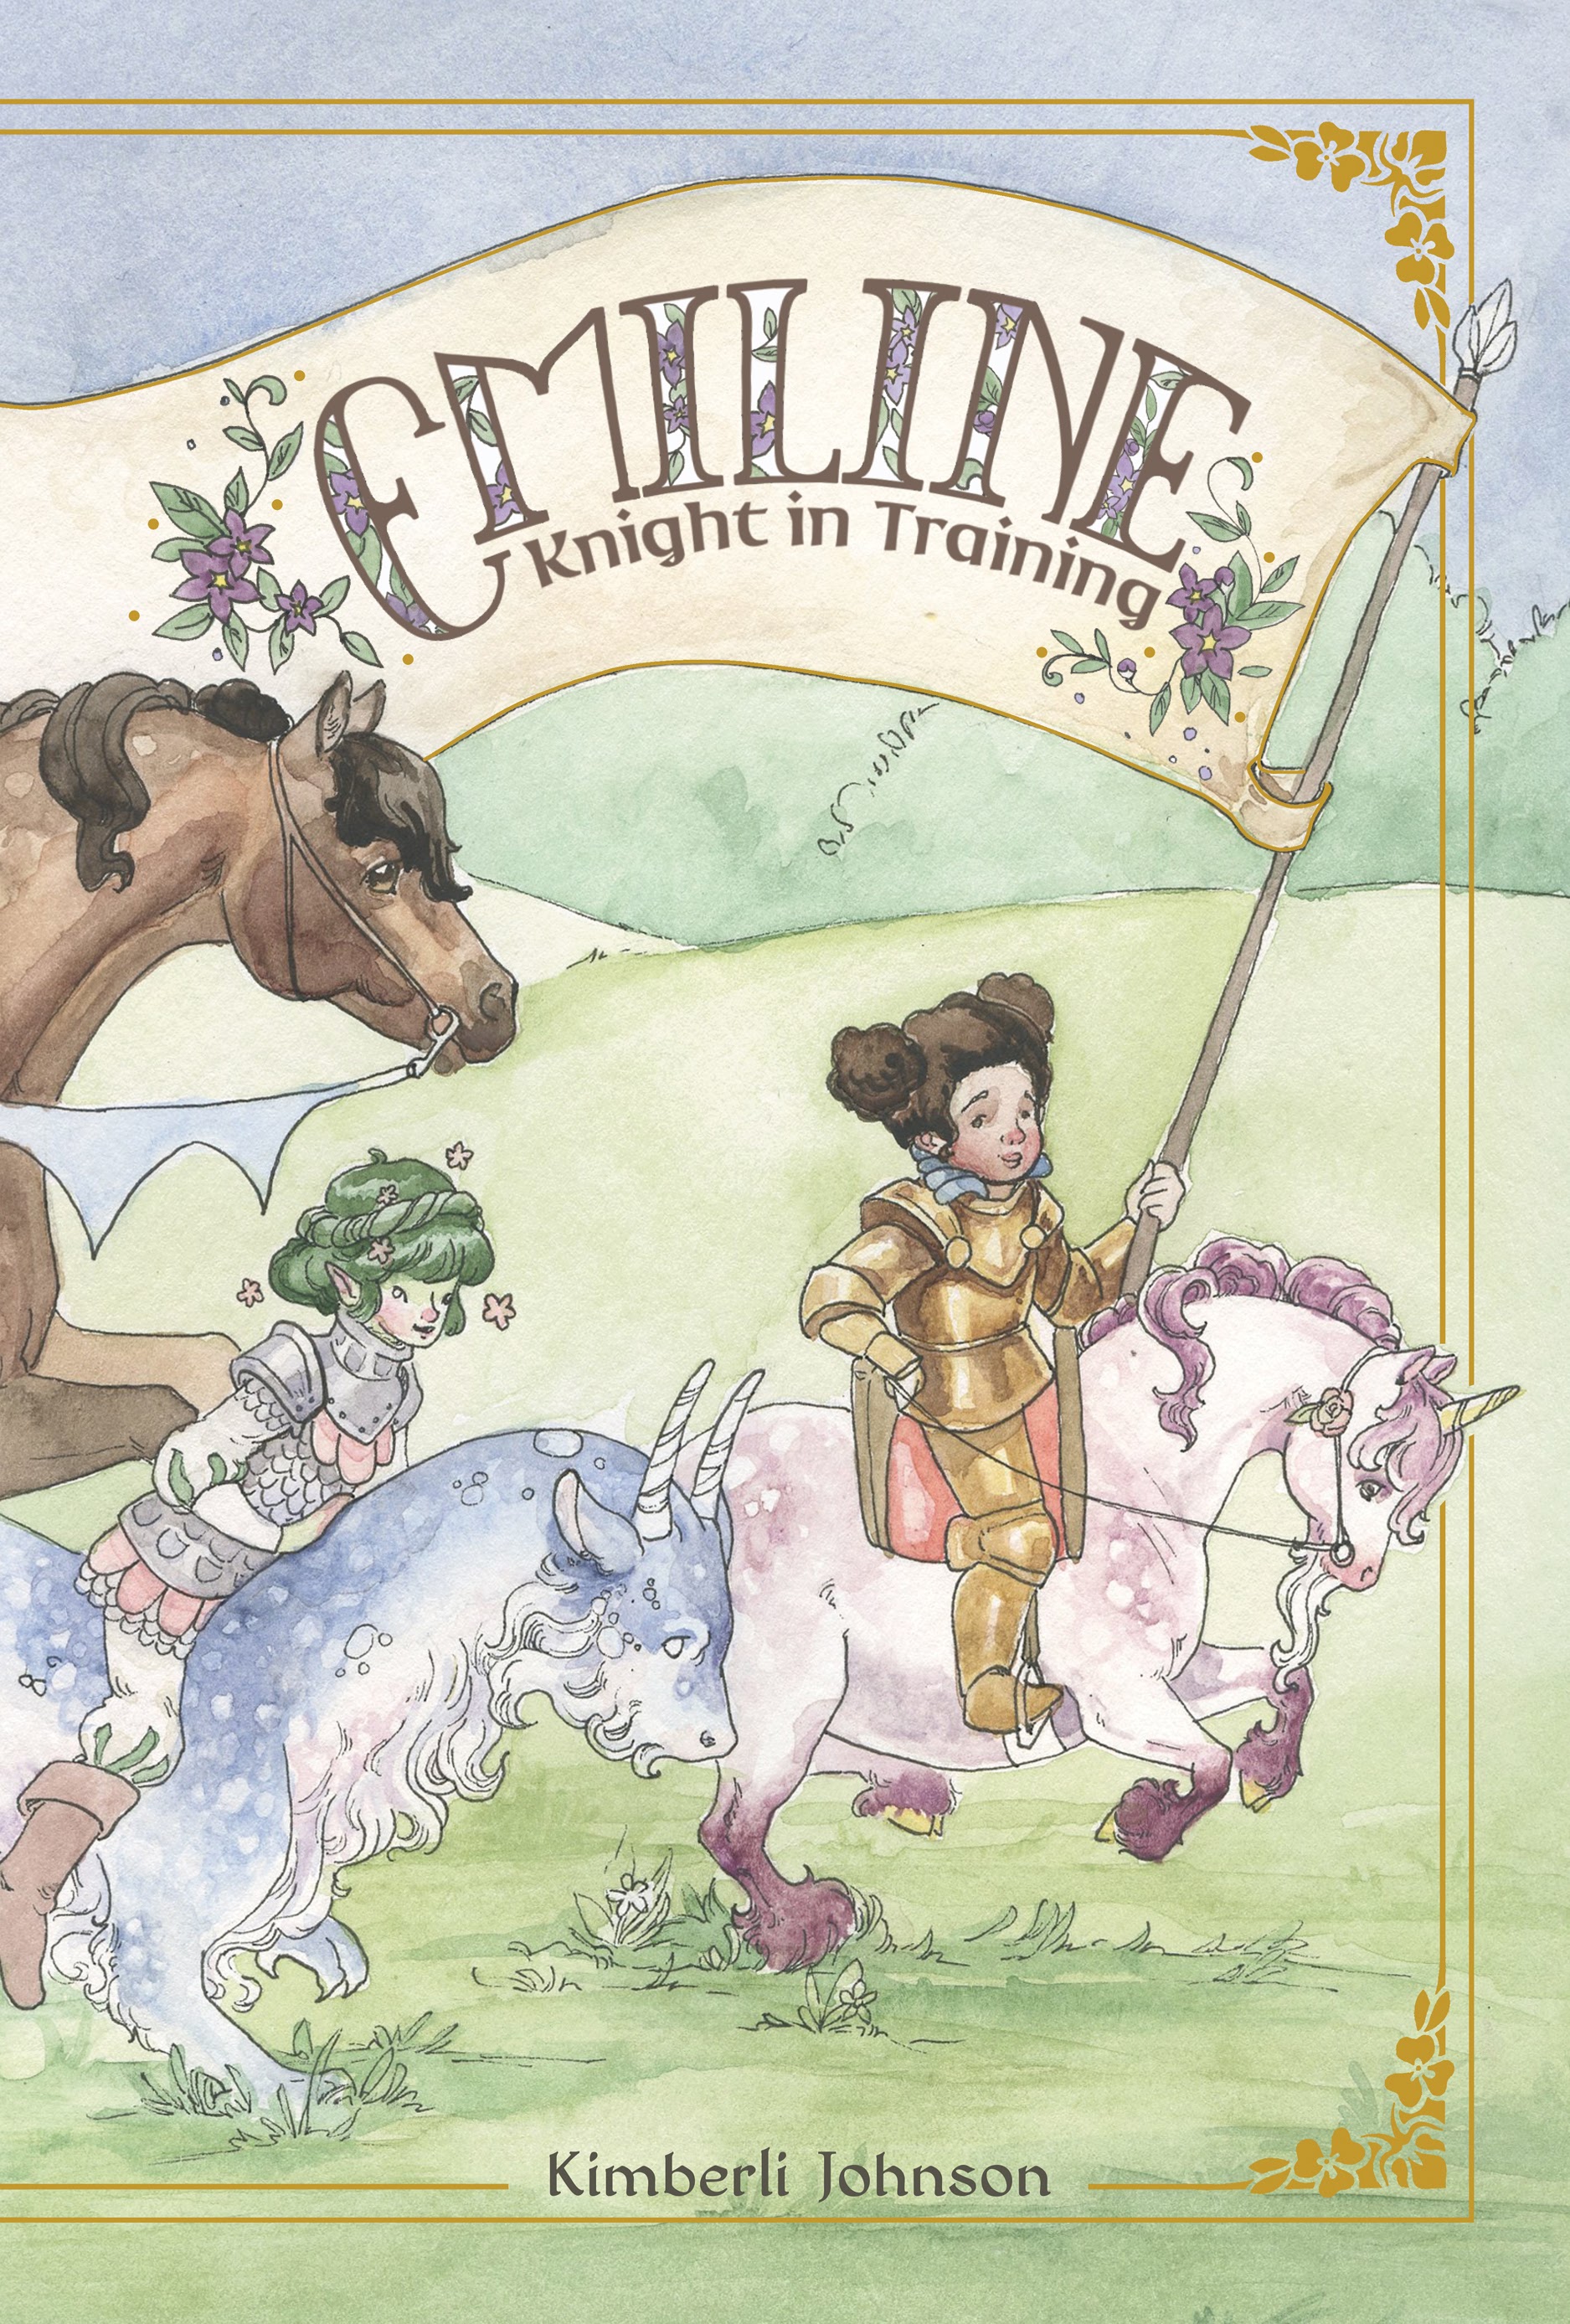 Read online Emiline: Knight in Training comic -  Issue # Full - 1